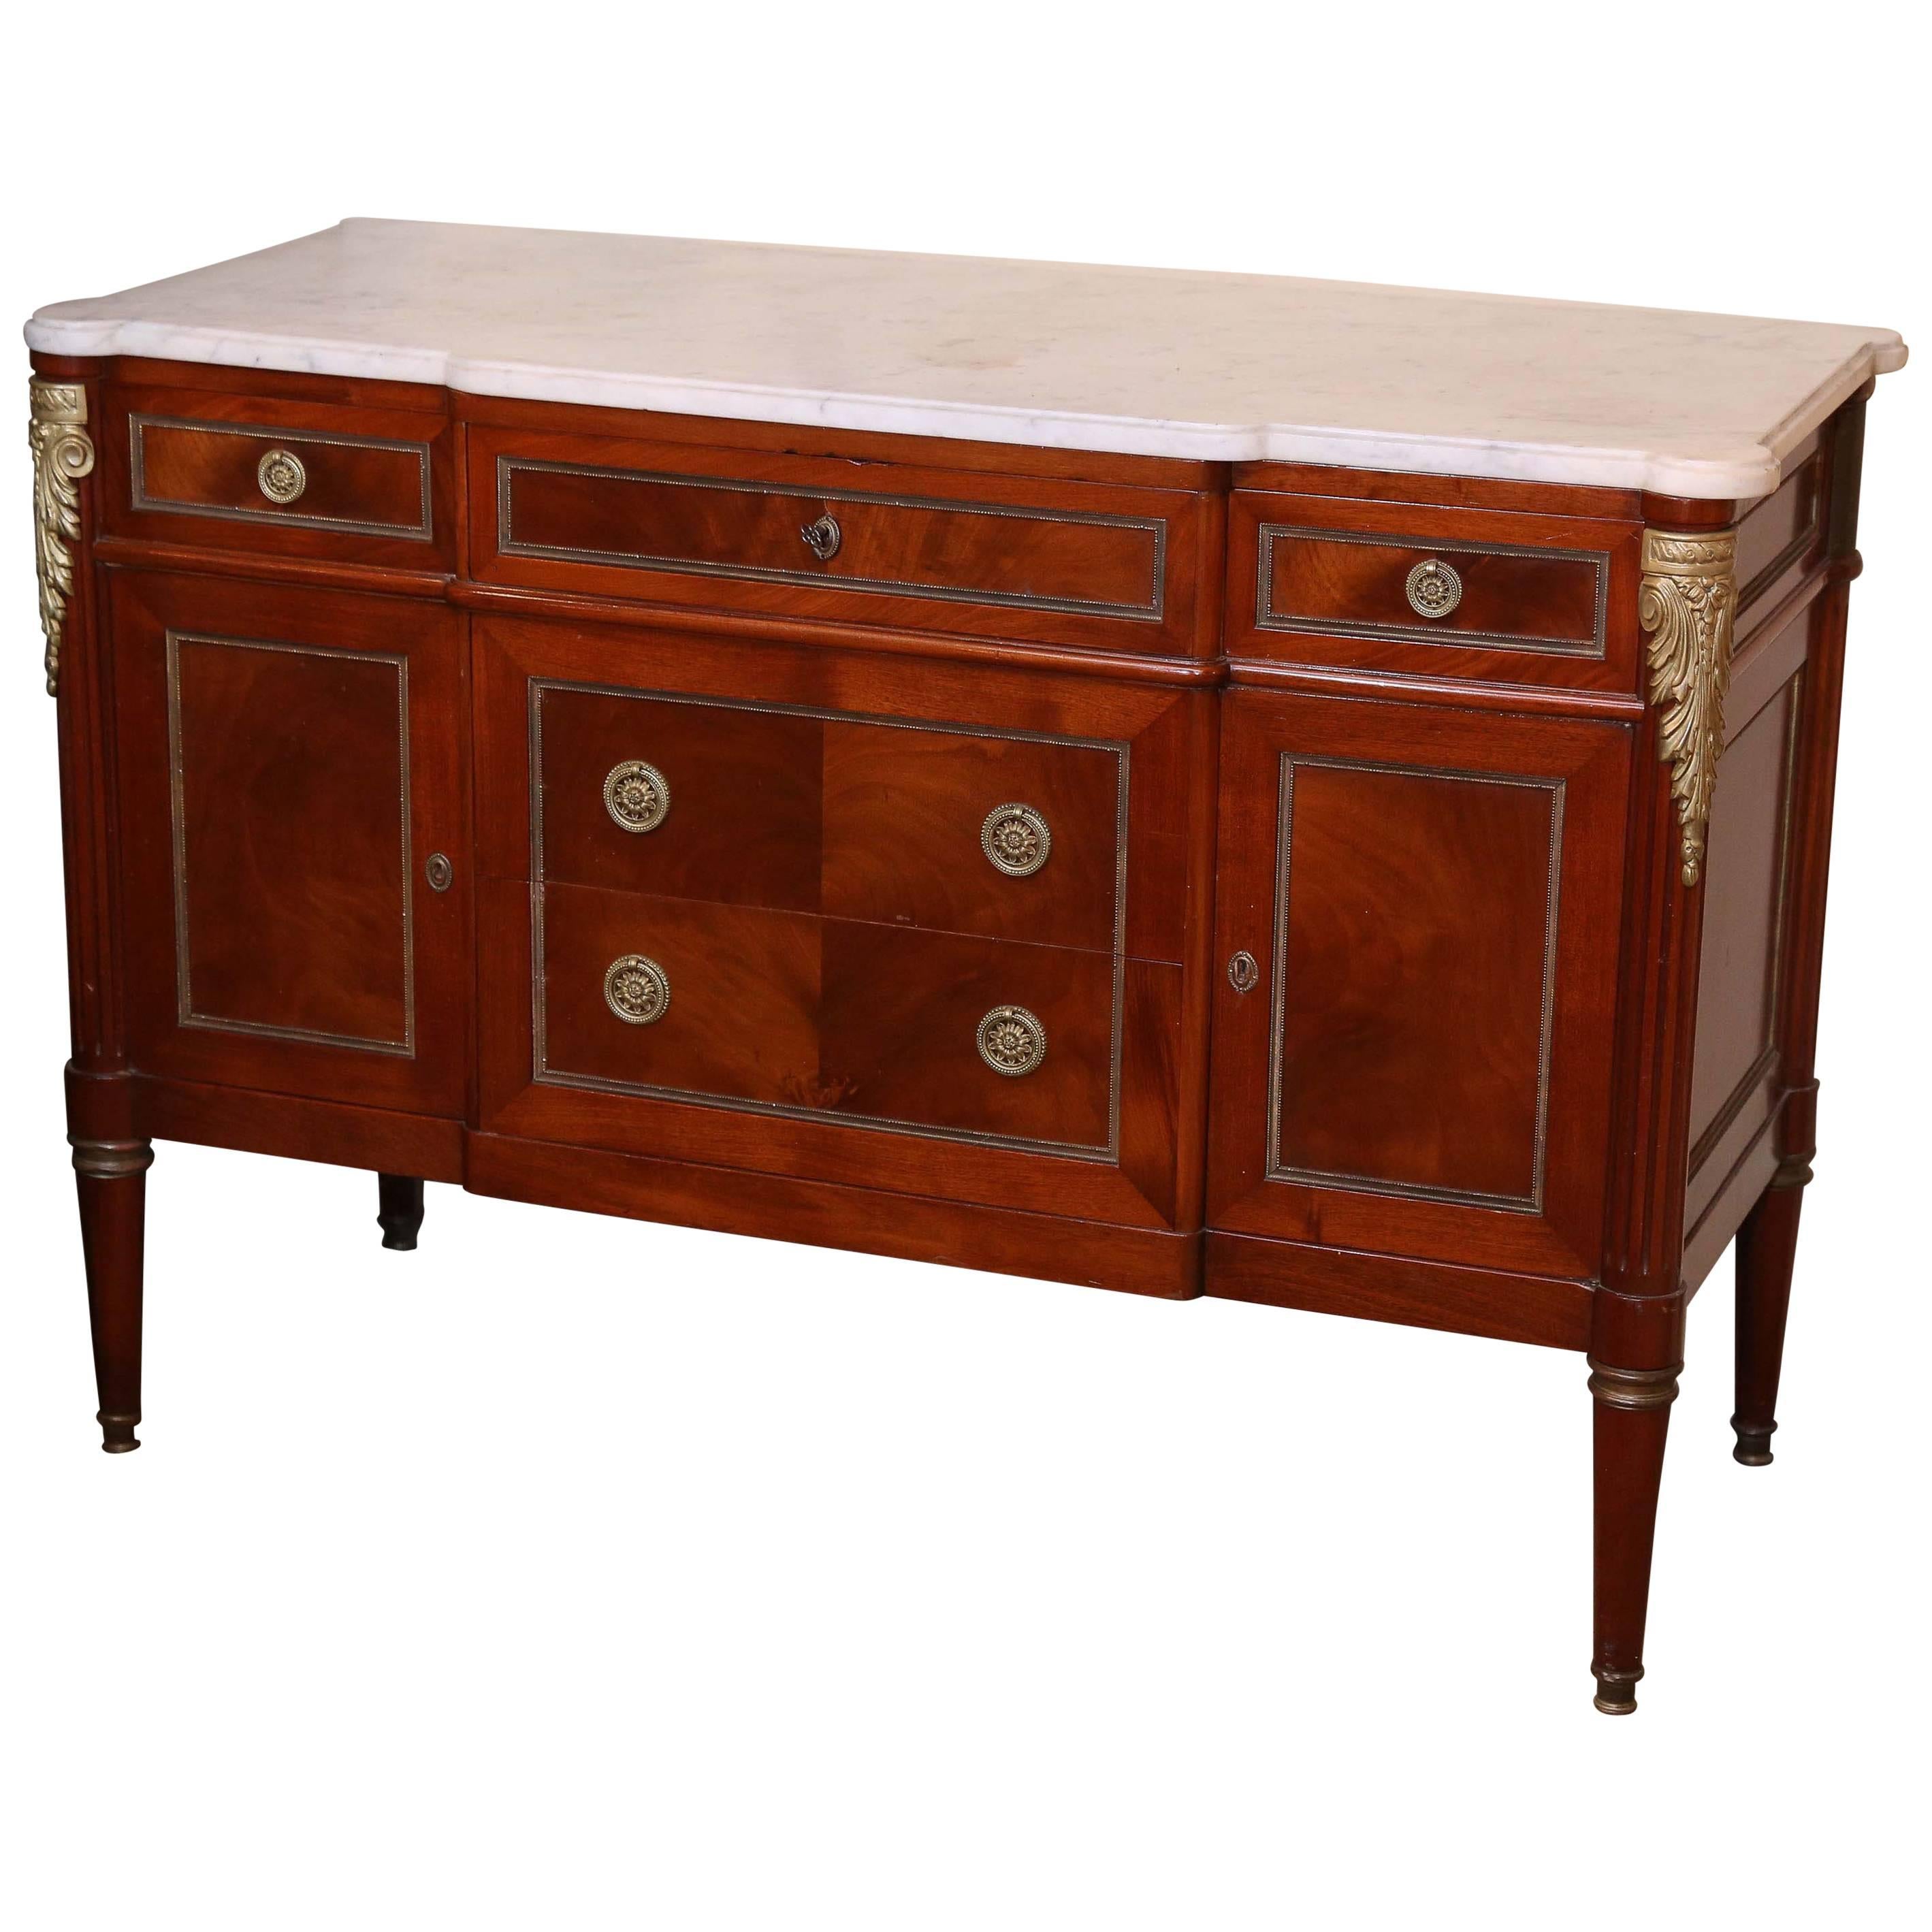 Louis XVI 19th Century Marble-Top Chest of Drawers or Commode, Mahogany